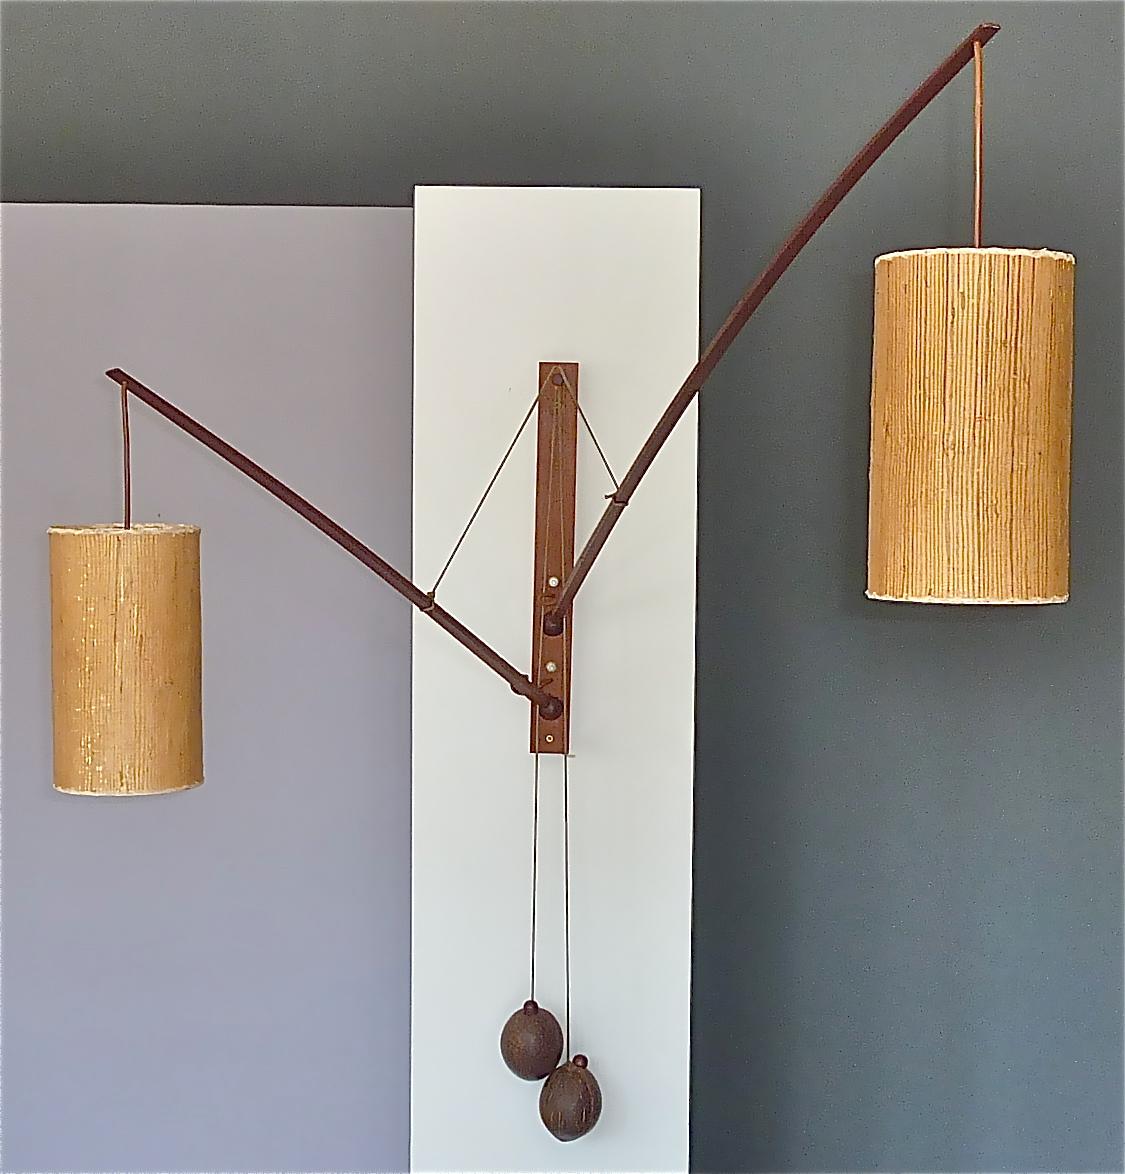 Monumental midcentury and super rare solid teak double wall light by Rupprecht Skrip, Germany circa 1950s to 1960s. Twice signed with Skrip Germany on top and Skrip Leuchte on reverse the very refined and adjustable midcentury wall light sculpture